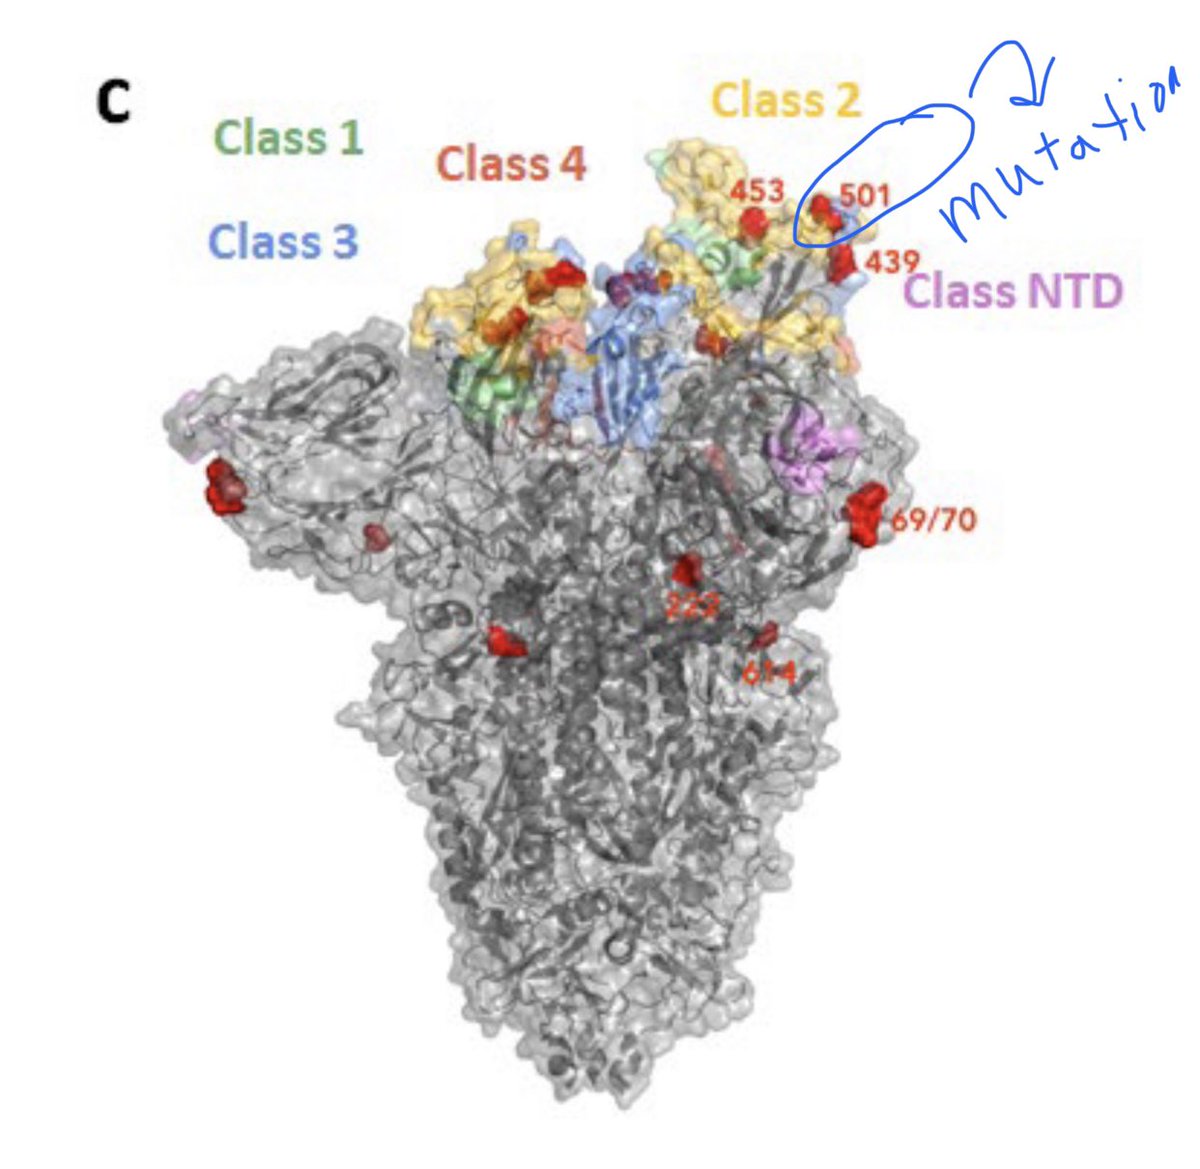 25) more specifically, the RECEPTOR BINDING DOMAIN (ie the “docking sites” on the spike to human receptor)... has 4 sites—4 classes. And again, you can see for yourself in 3D image where the damn N501Y mutation is—right *inside one of the 4 docking sites*!  https://www.cogconsortium.uk/wp-content/uploads/2020/12/Report-1_COG-UK_19-December-2020_SARS-CoV-2-Mutations.pdf